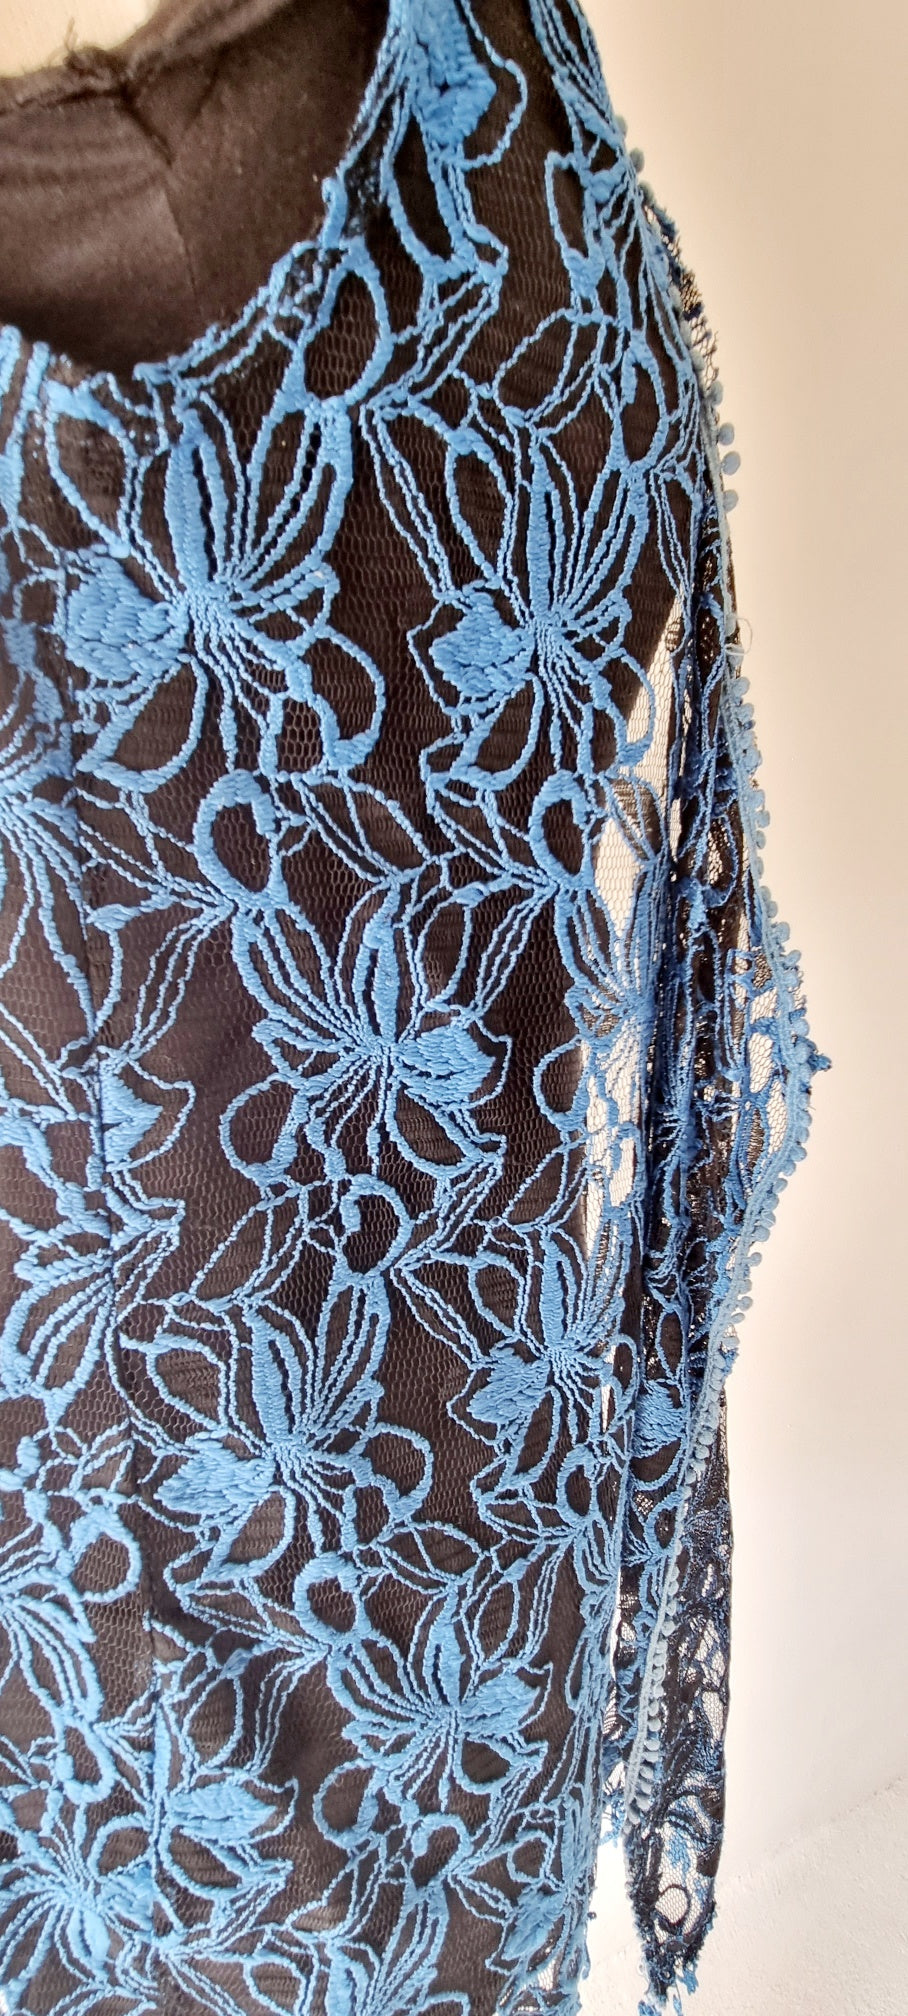 No Brand - Unique Blue & Black embroidered netted sleeveless overlay